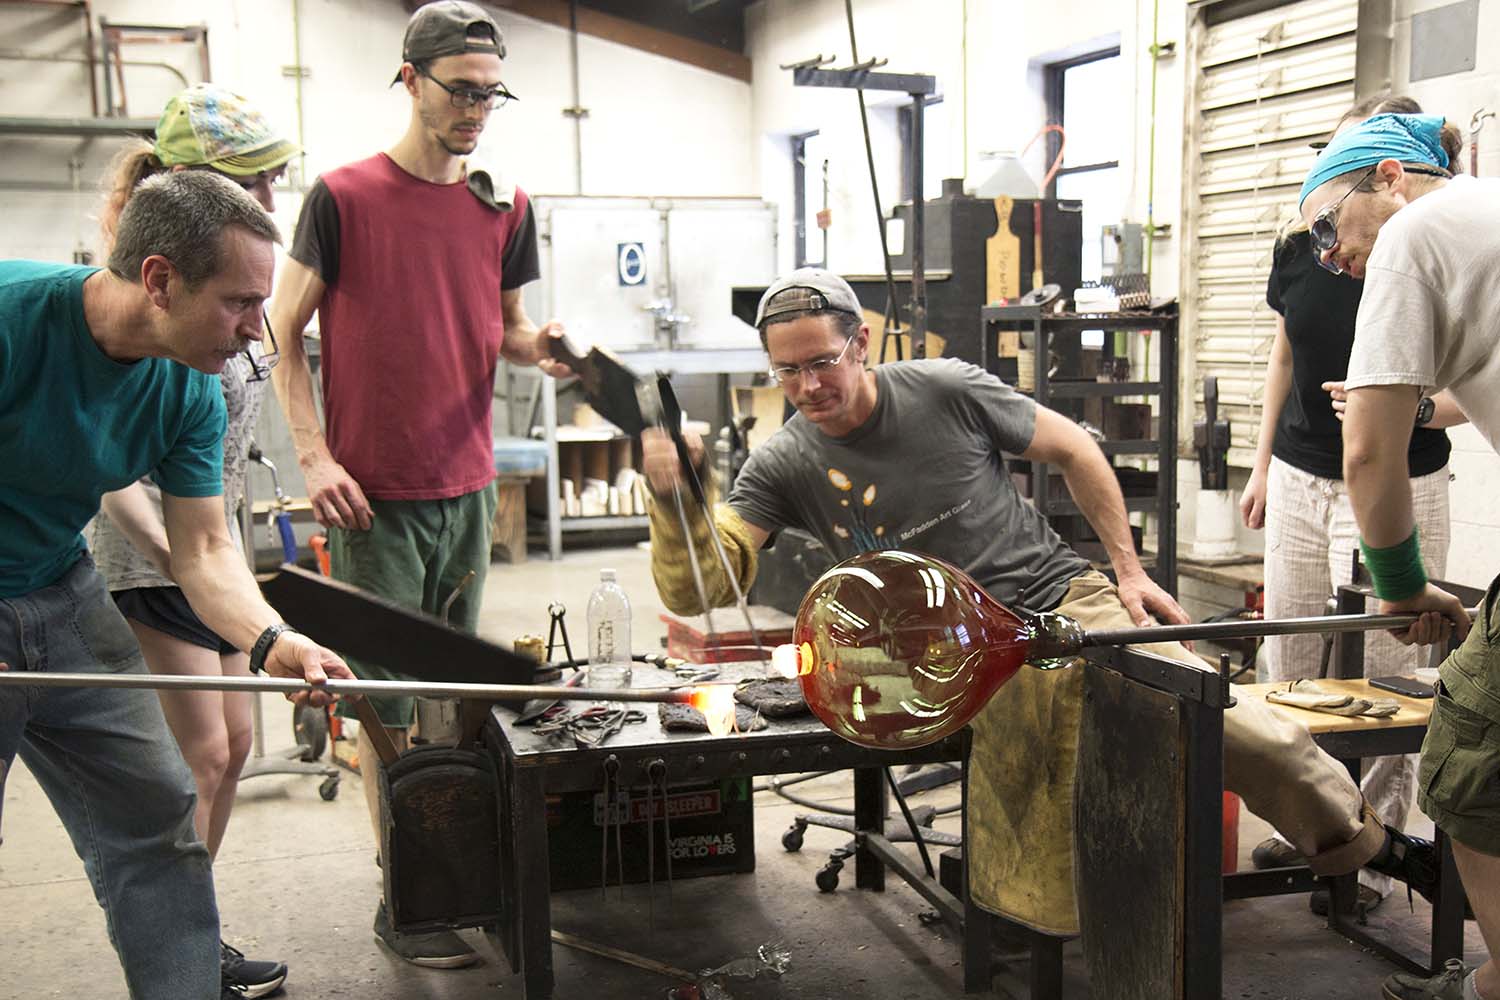 Several students observe three people working on a blown glass piece.